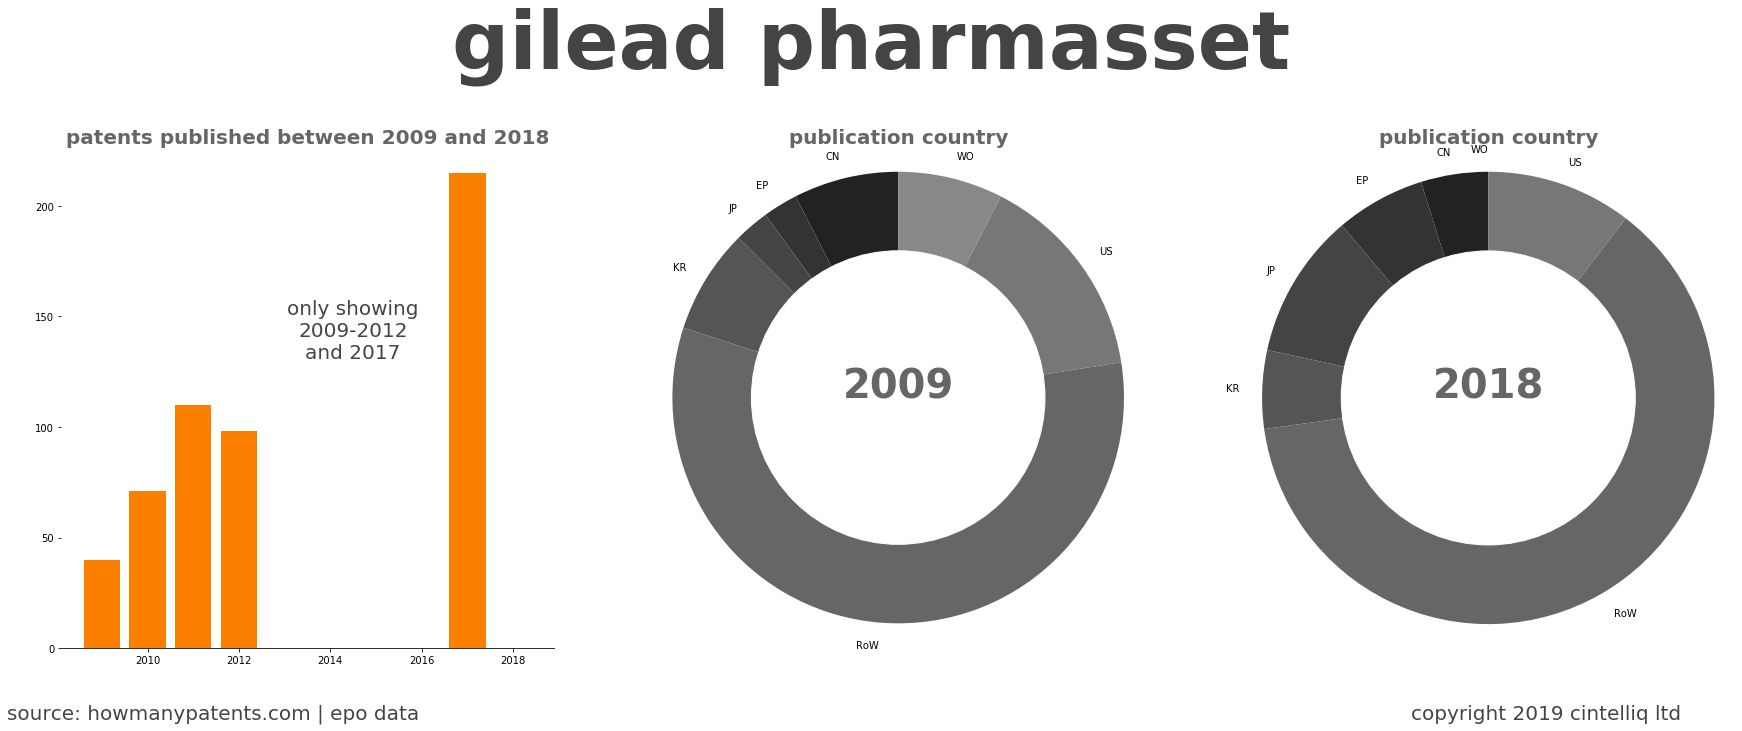 summary of patents for Gilead Pharmasset